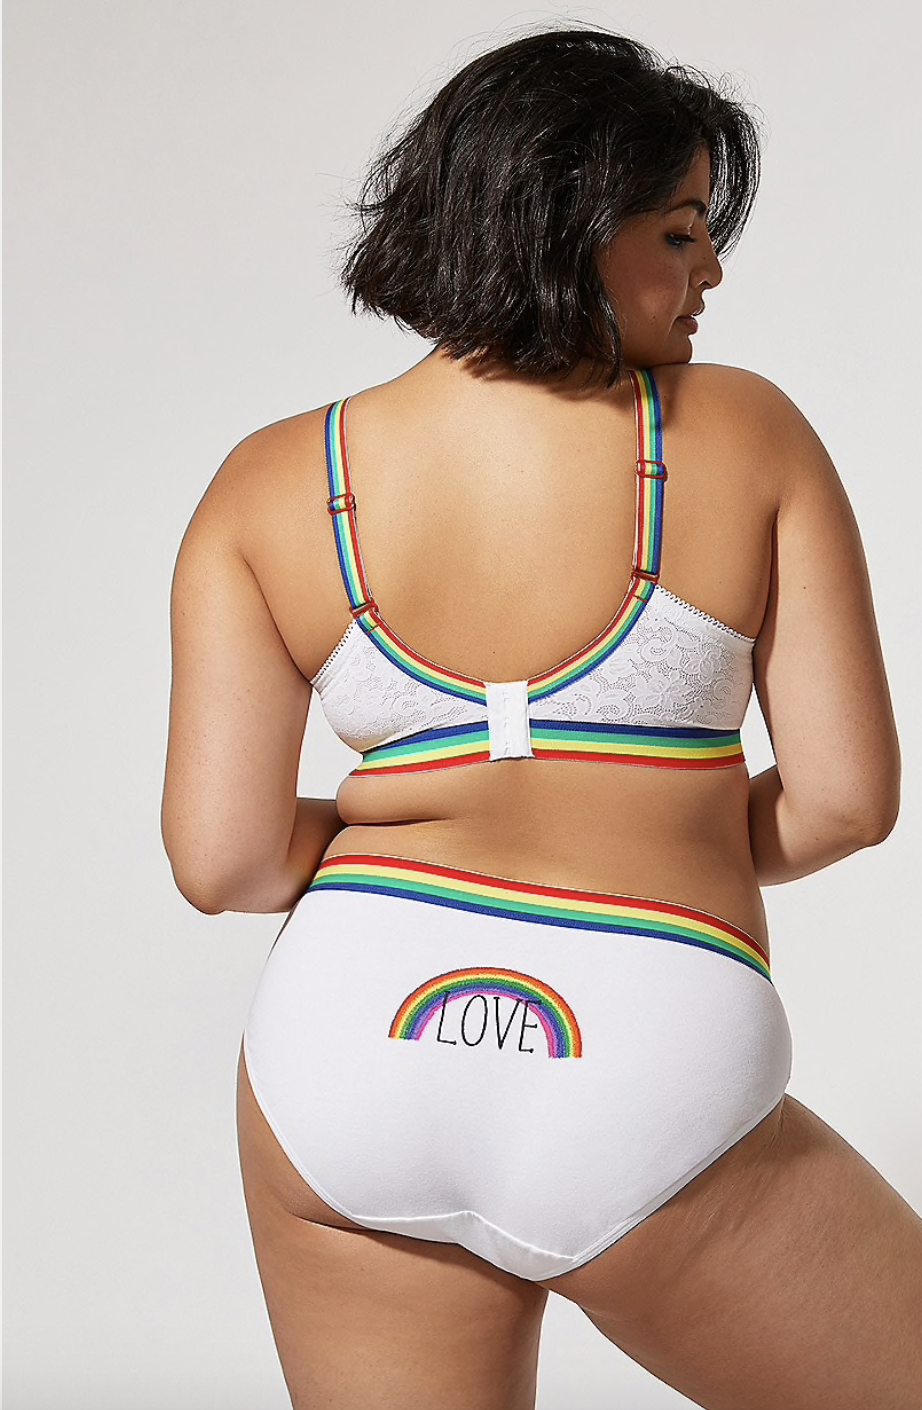 Lane Bryant's FirstEver Pride Collection Is Here and Adorably Queer